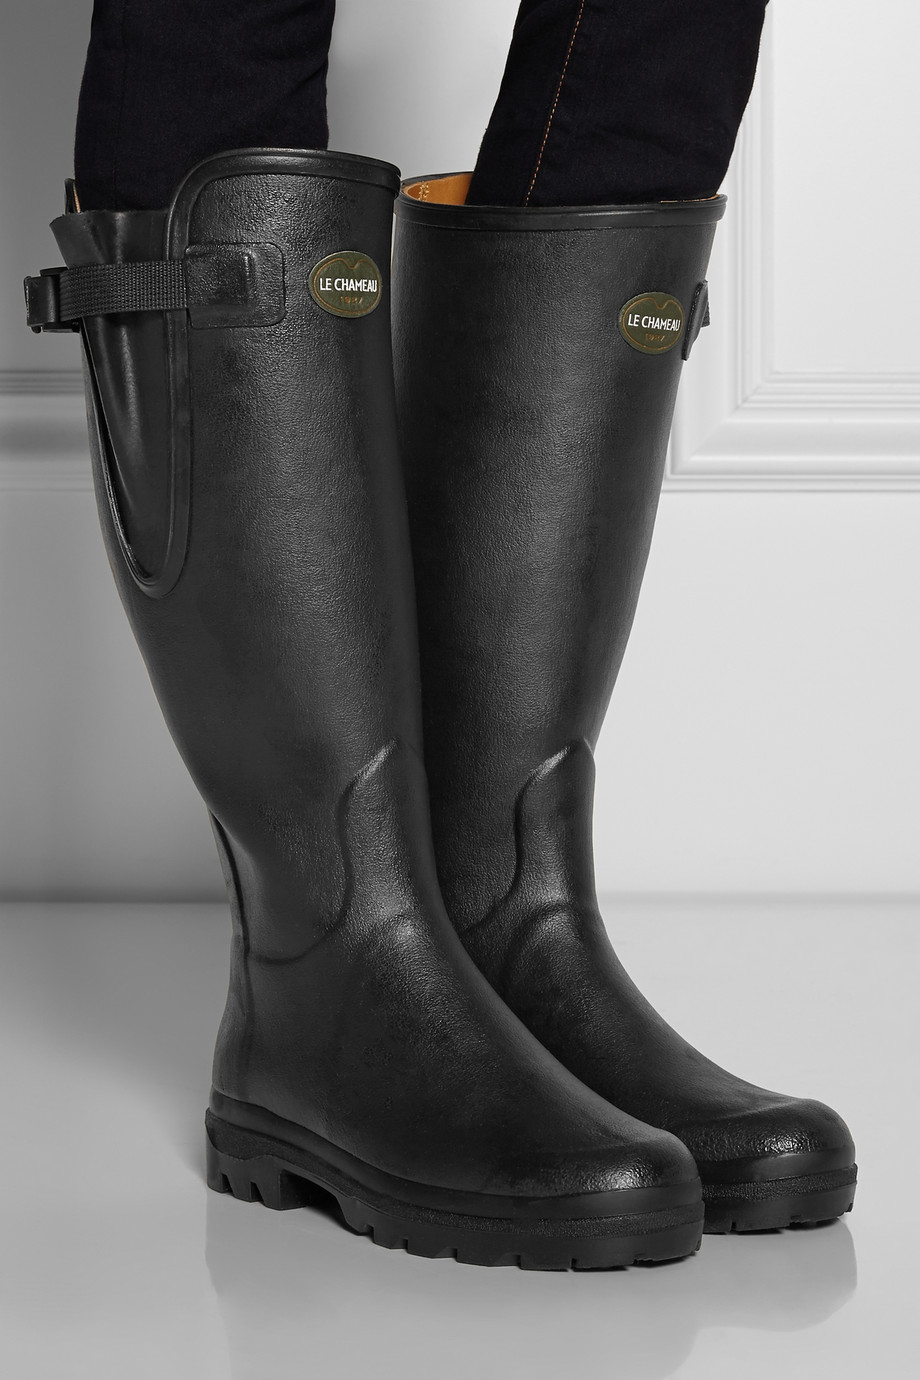 Lyst - Le Chameau Vierzon Leatherlined Rubber Boots in Black